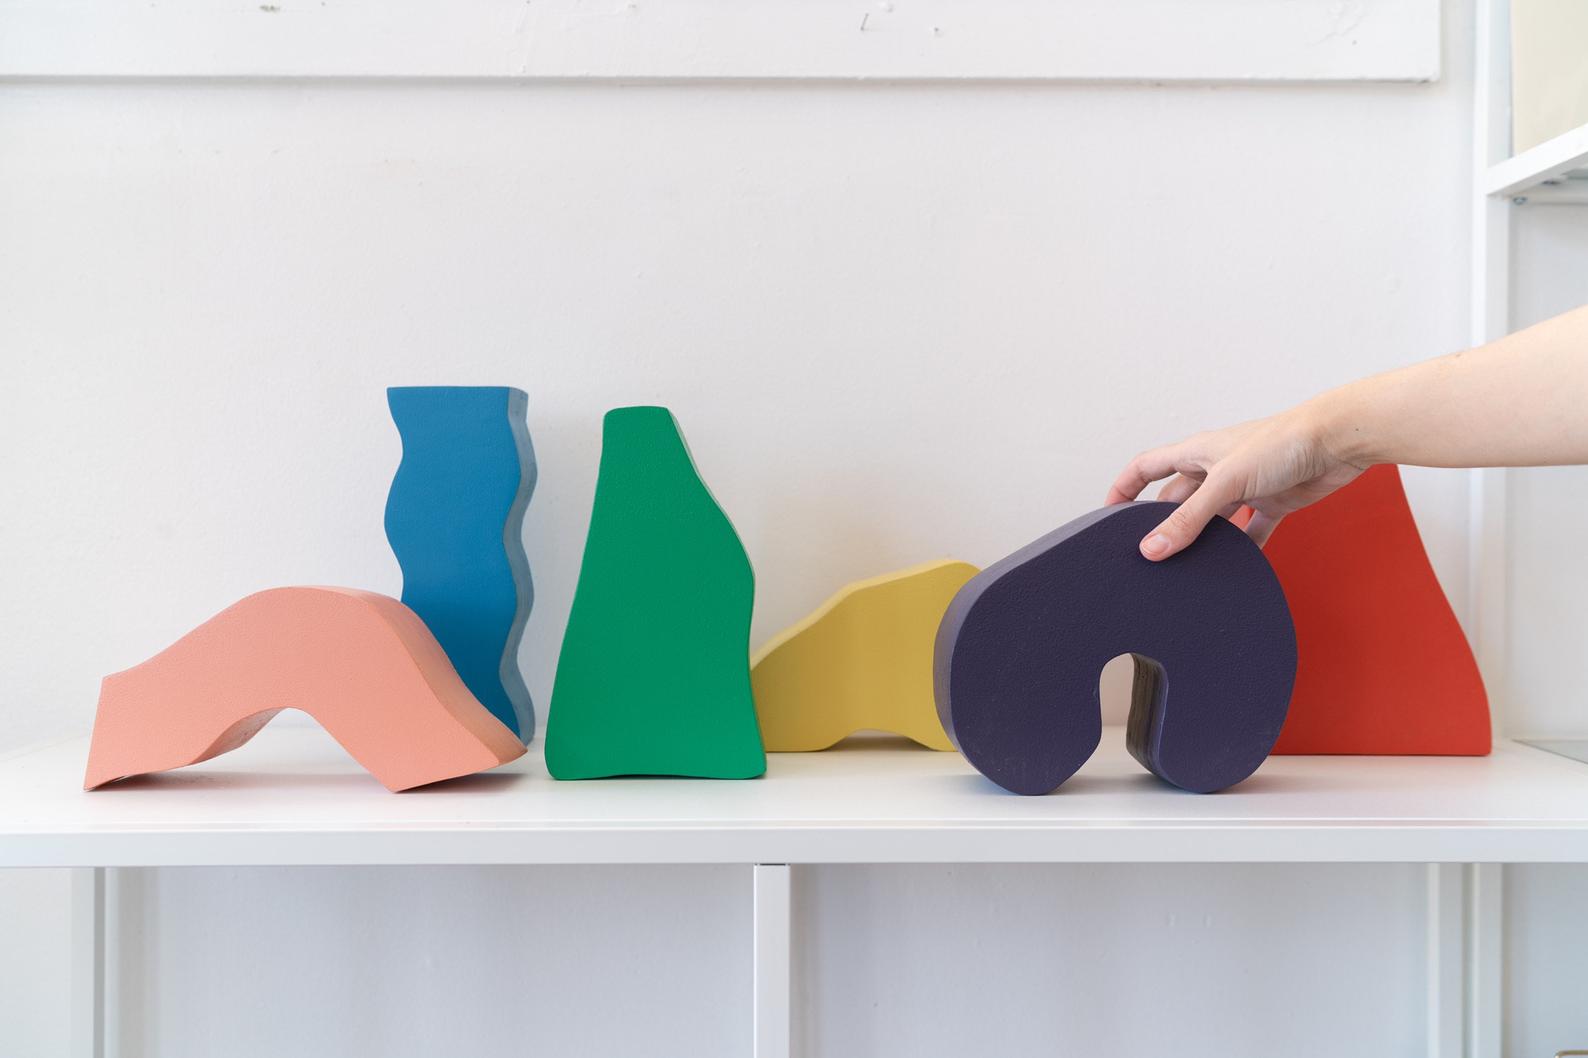 Six small sculptures in various bright colors being arranged by someone's hand